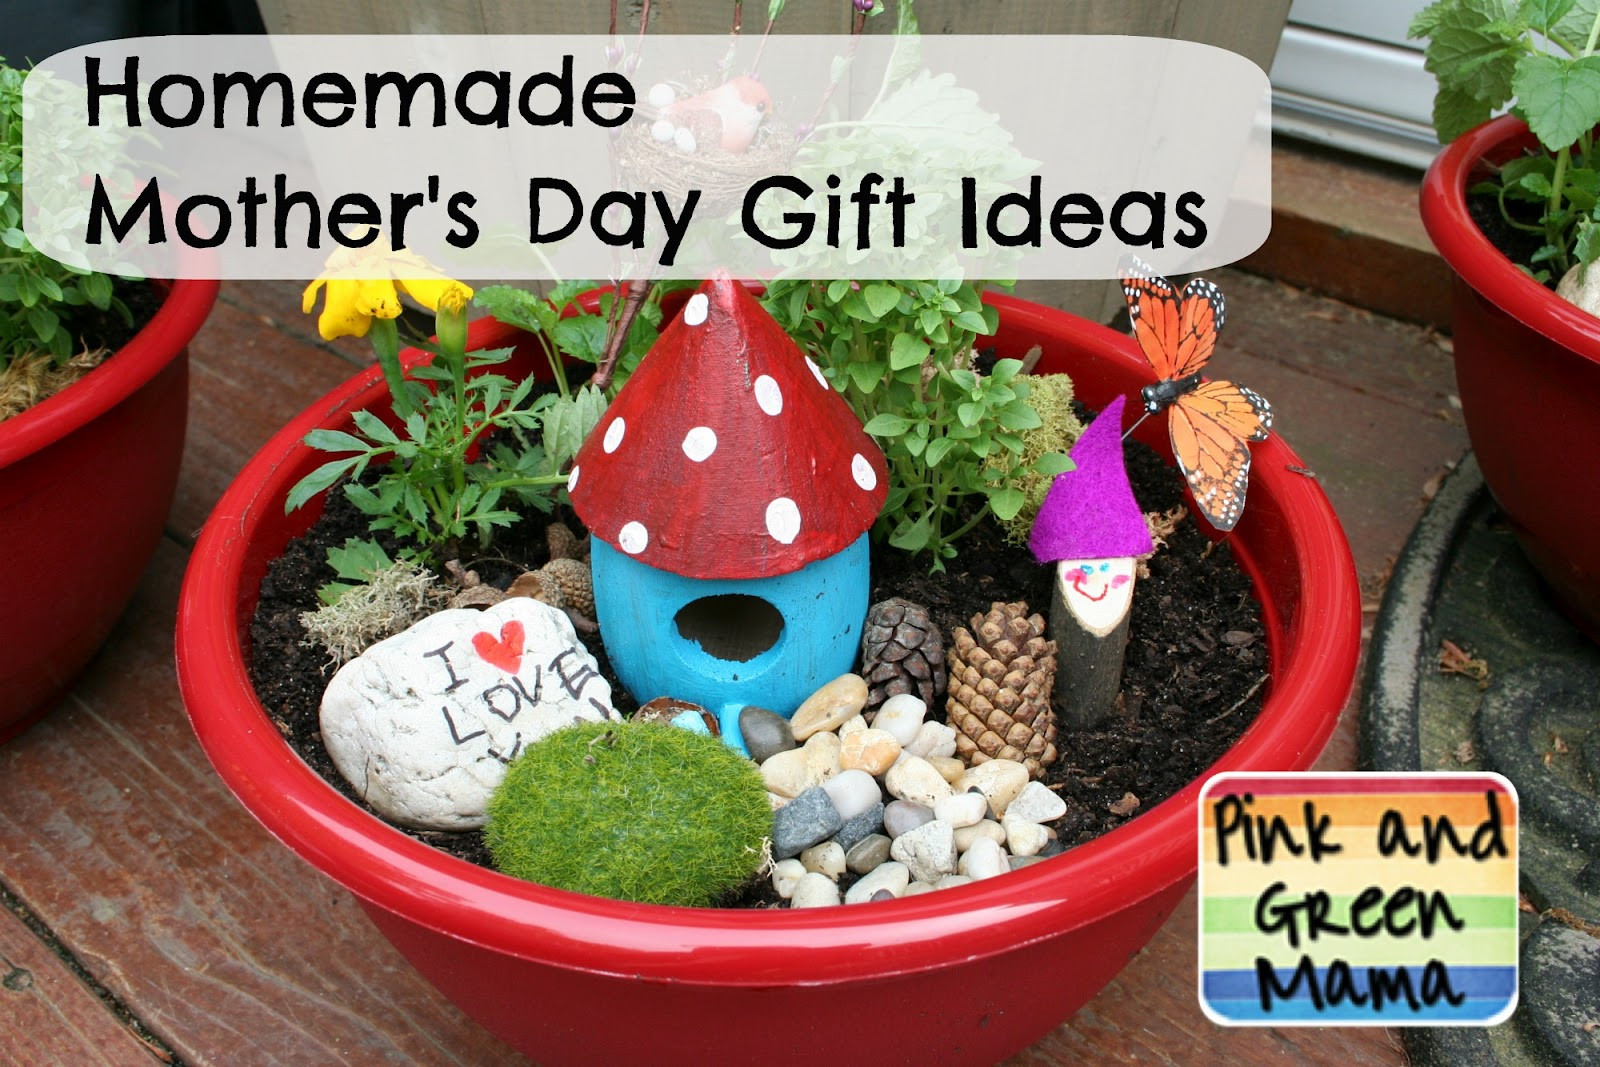 Mother Day Gift Ideas Homemade
 Pink and Green Mama Homemade Mother s Day Gift Ideas